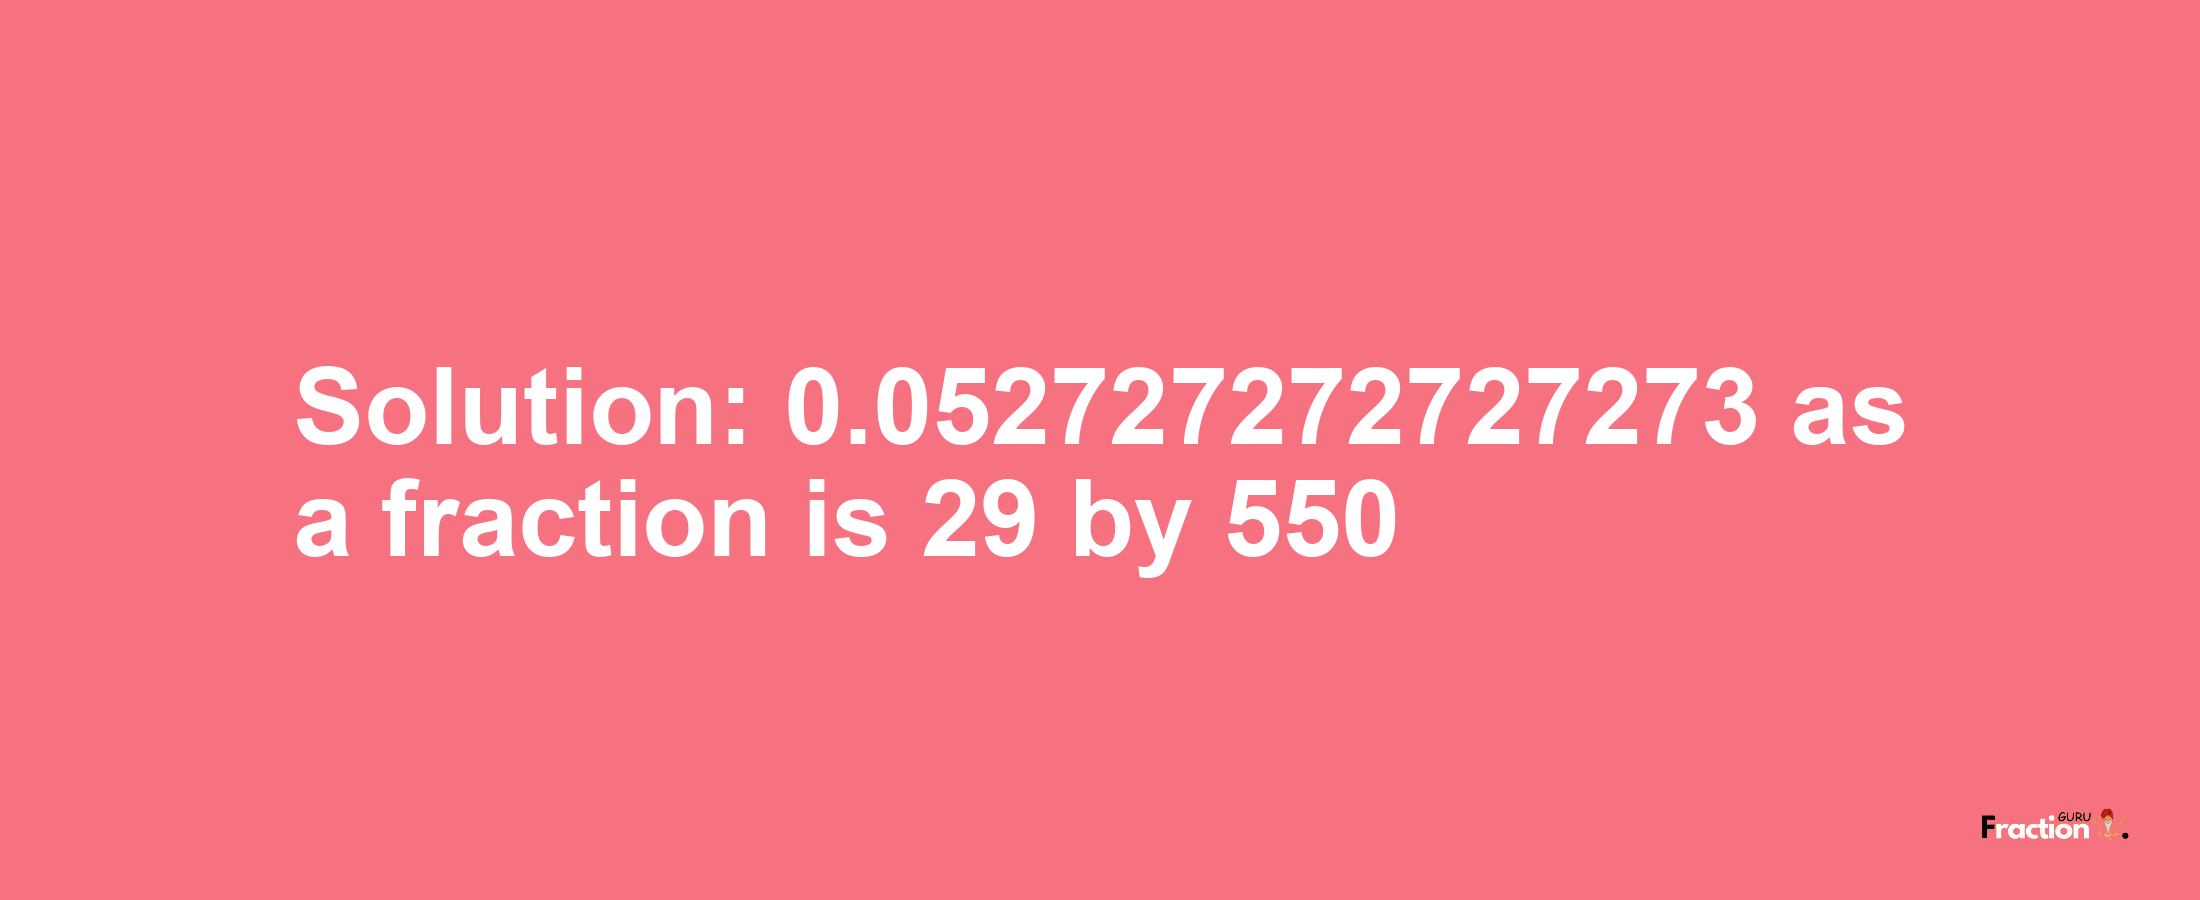 Solution:0.052727272727273 as a fraction is 29/550